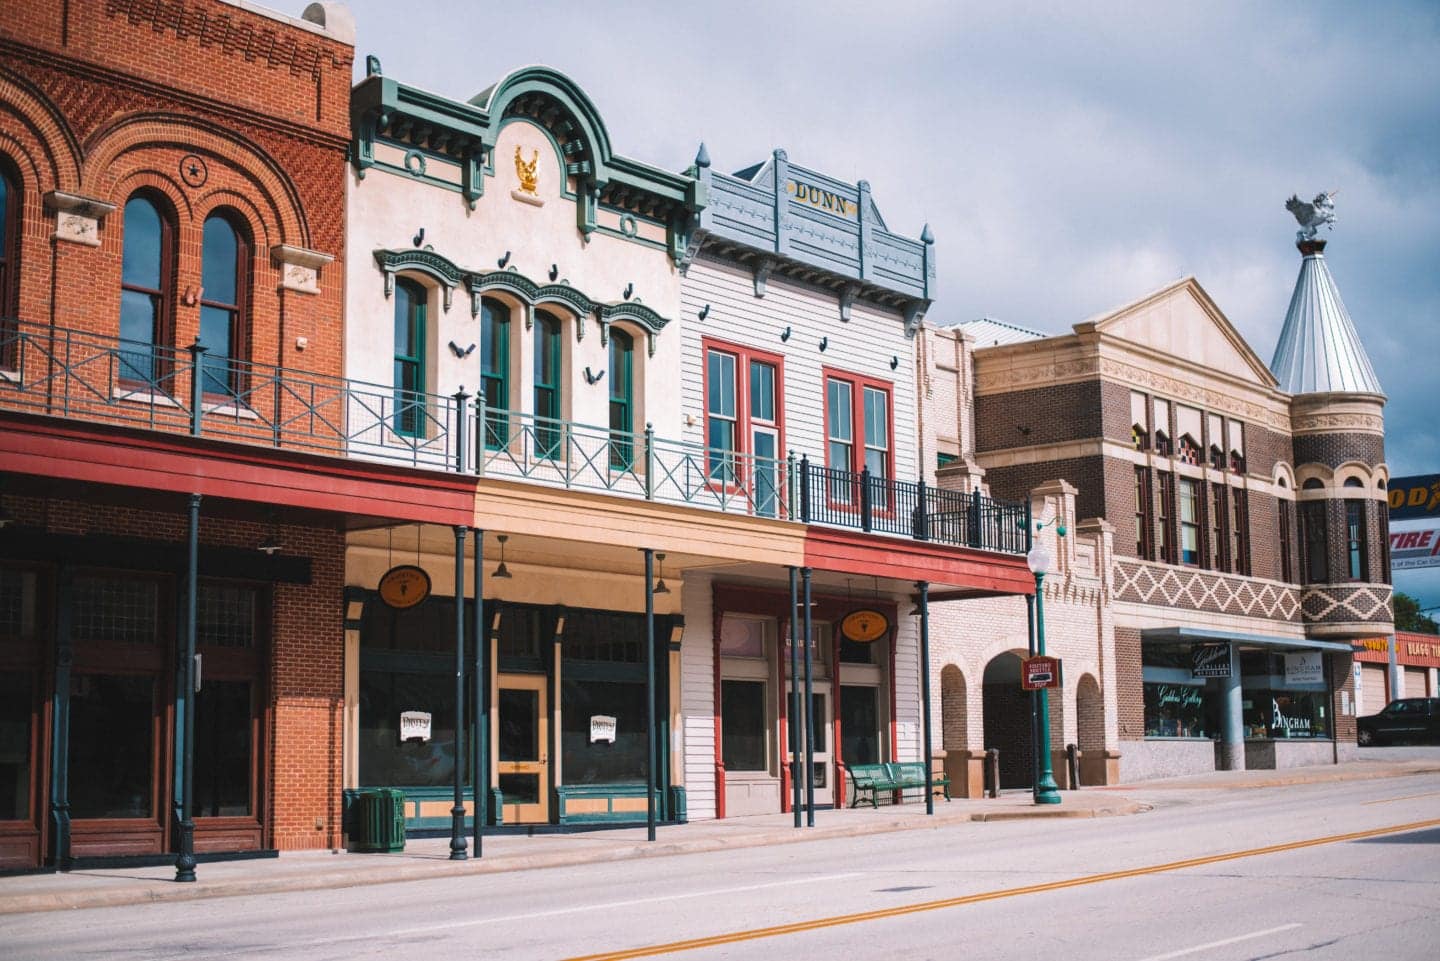 Explore These 10 Shops In Historic Downtown Grapevine